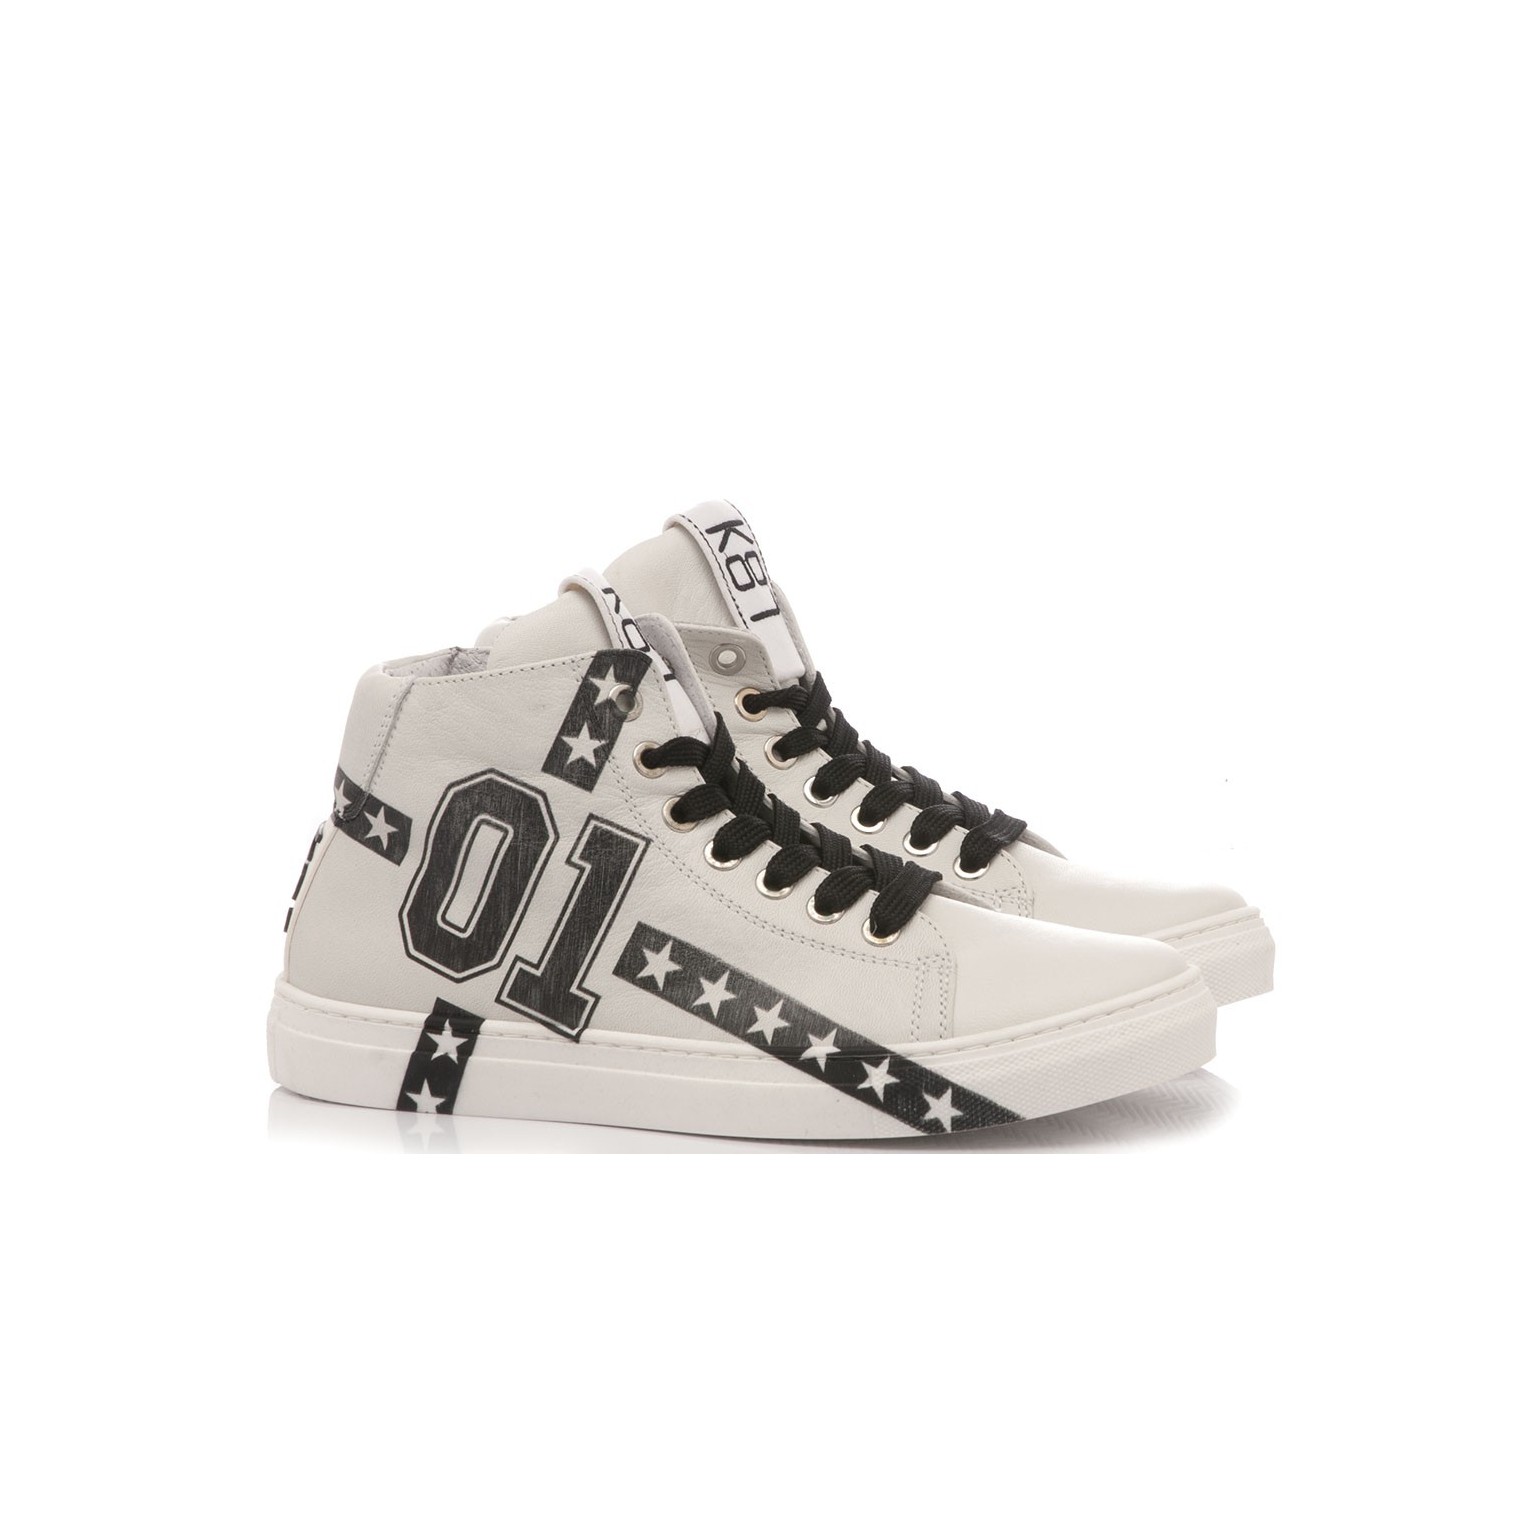 Be Kool Boy's Sneakers White Leather